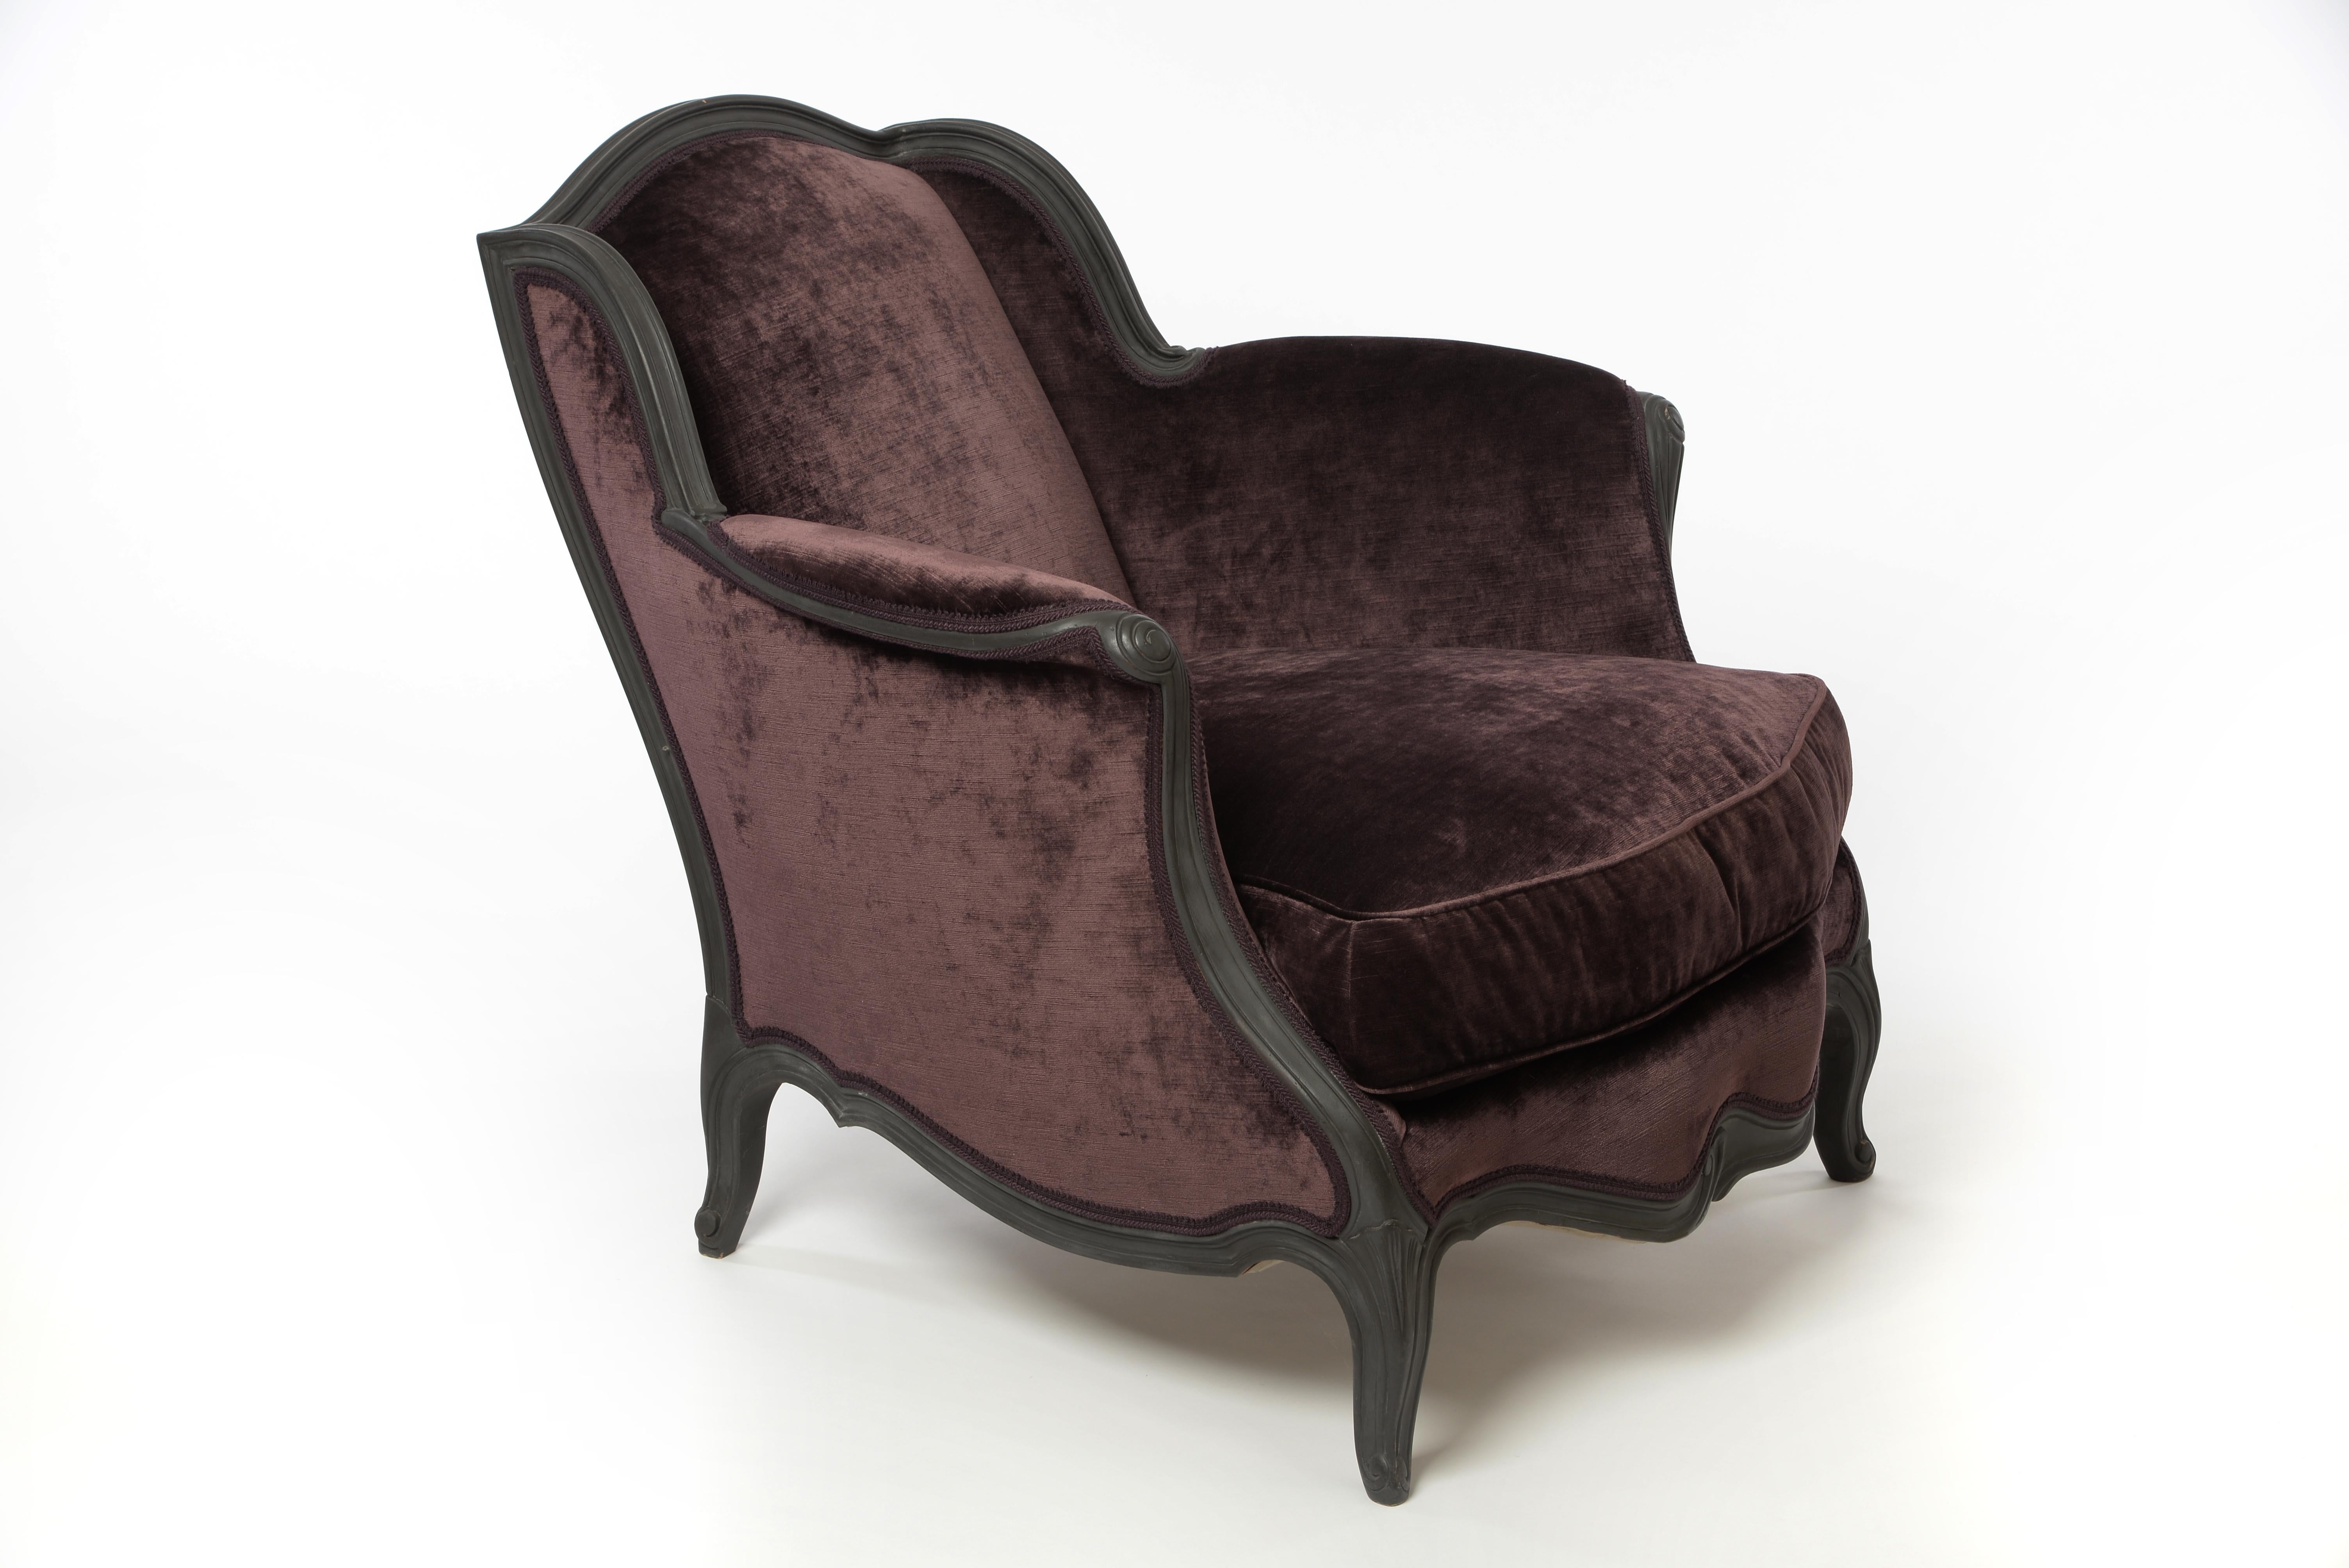 This wonderful pair of bergere chairs have a very sophisticated and elegant appearance. The handmade beech frame is elaborately curved and decorated. The dark paint in combination with the dramatic velvet fabric add masculinity.